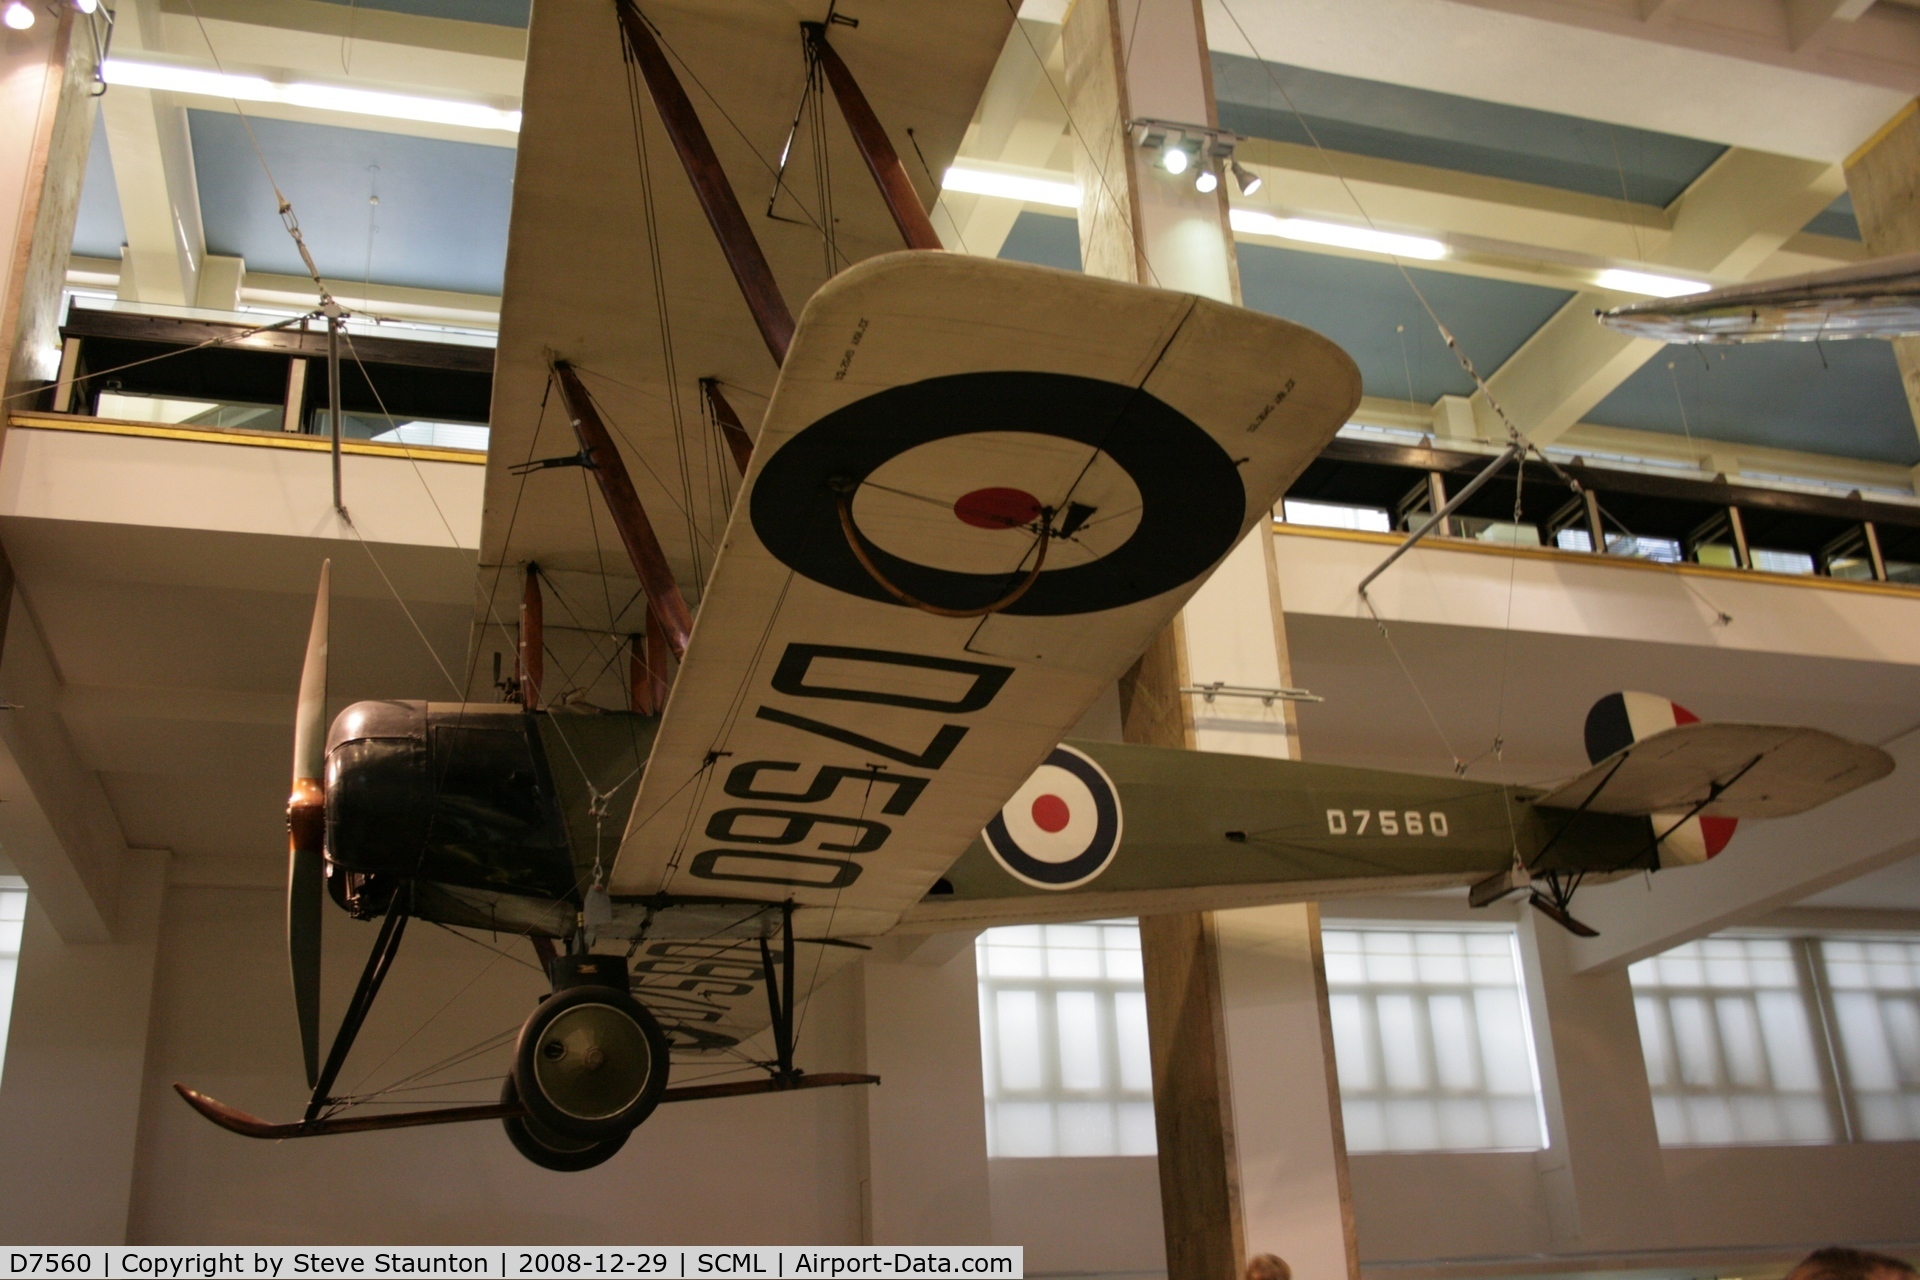 D7560, 1917 Avro 504K C/N Not found D7560, Taken at the Science Museum, London. December 2008